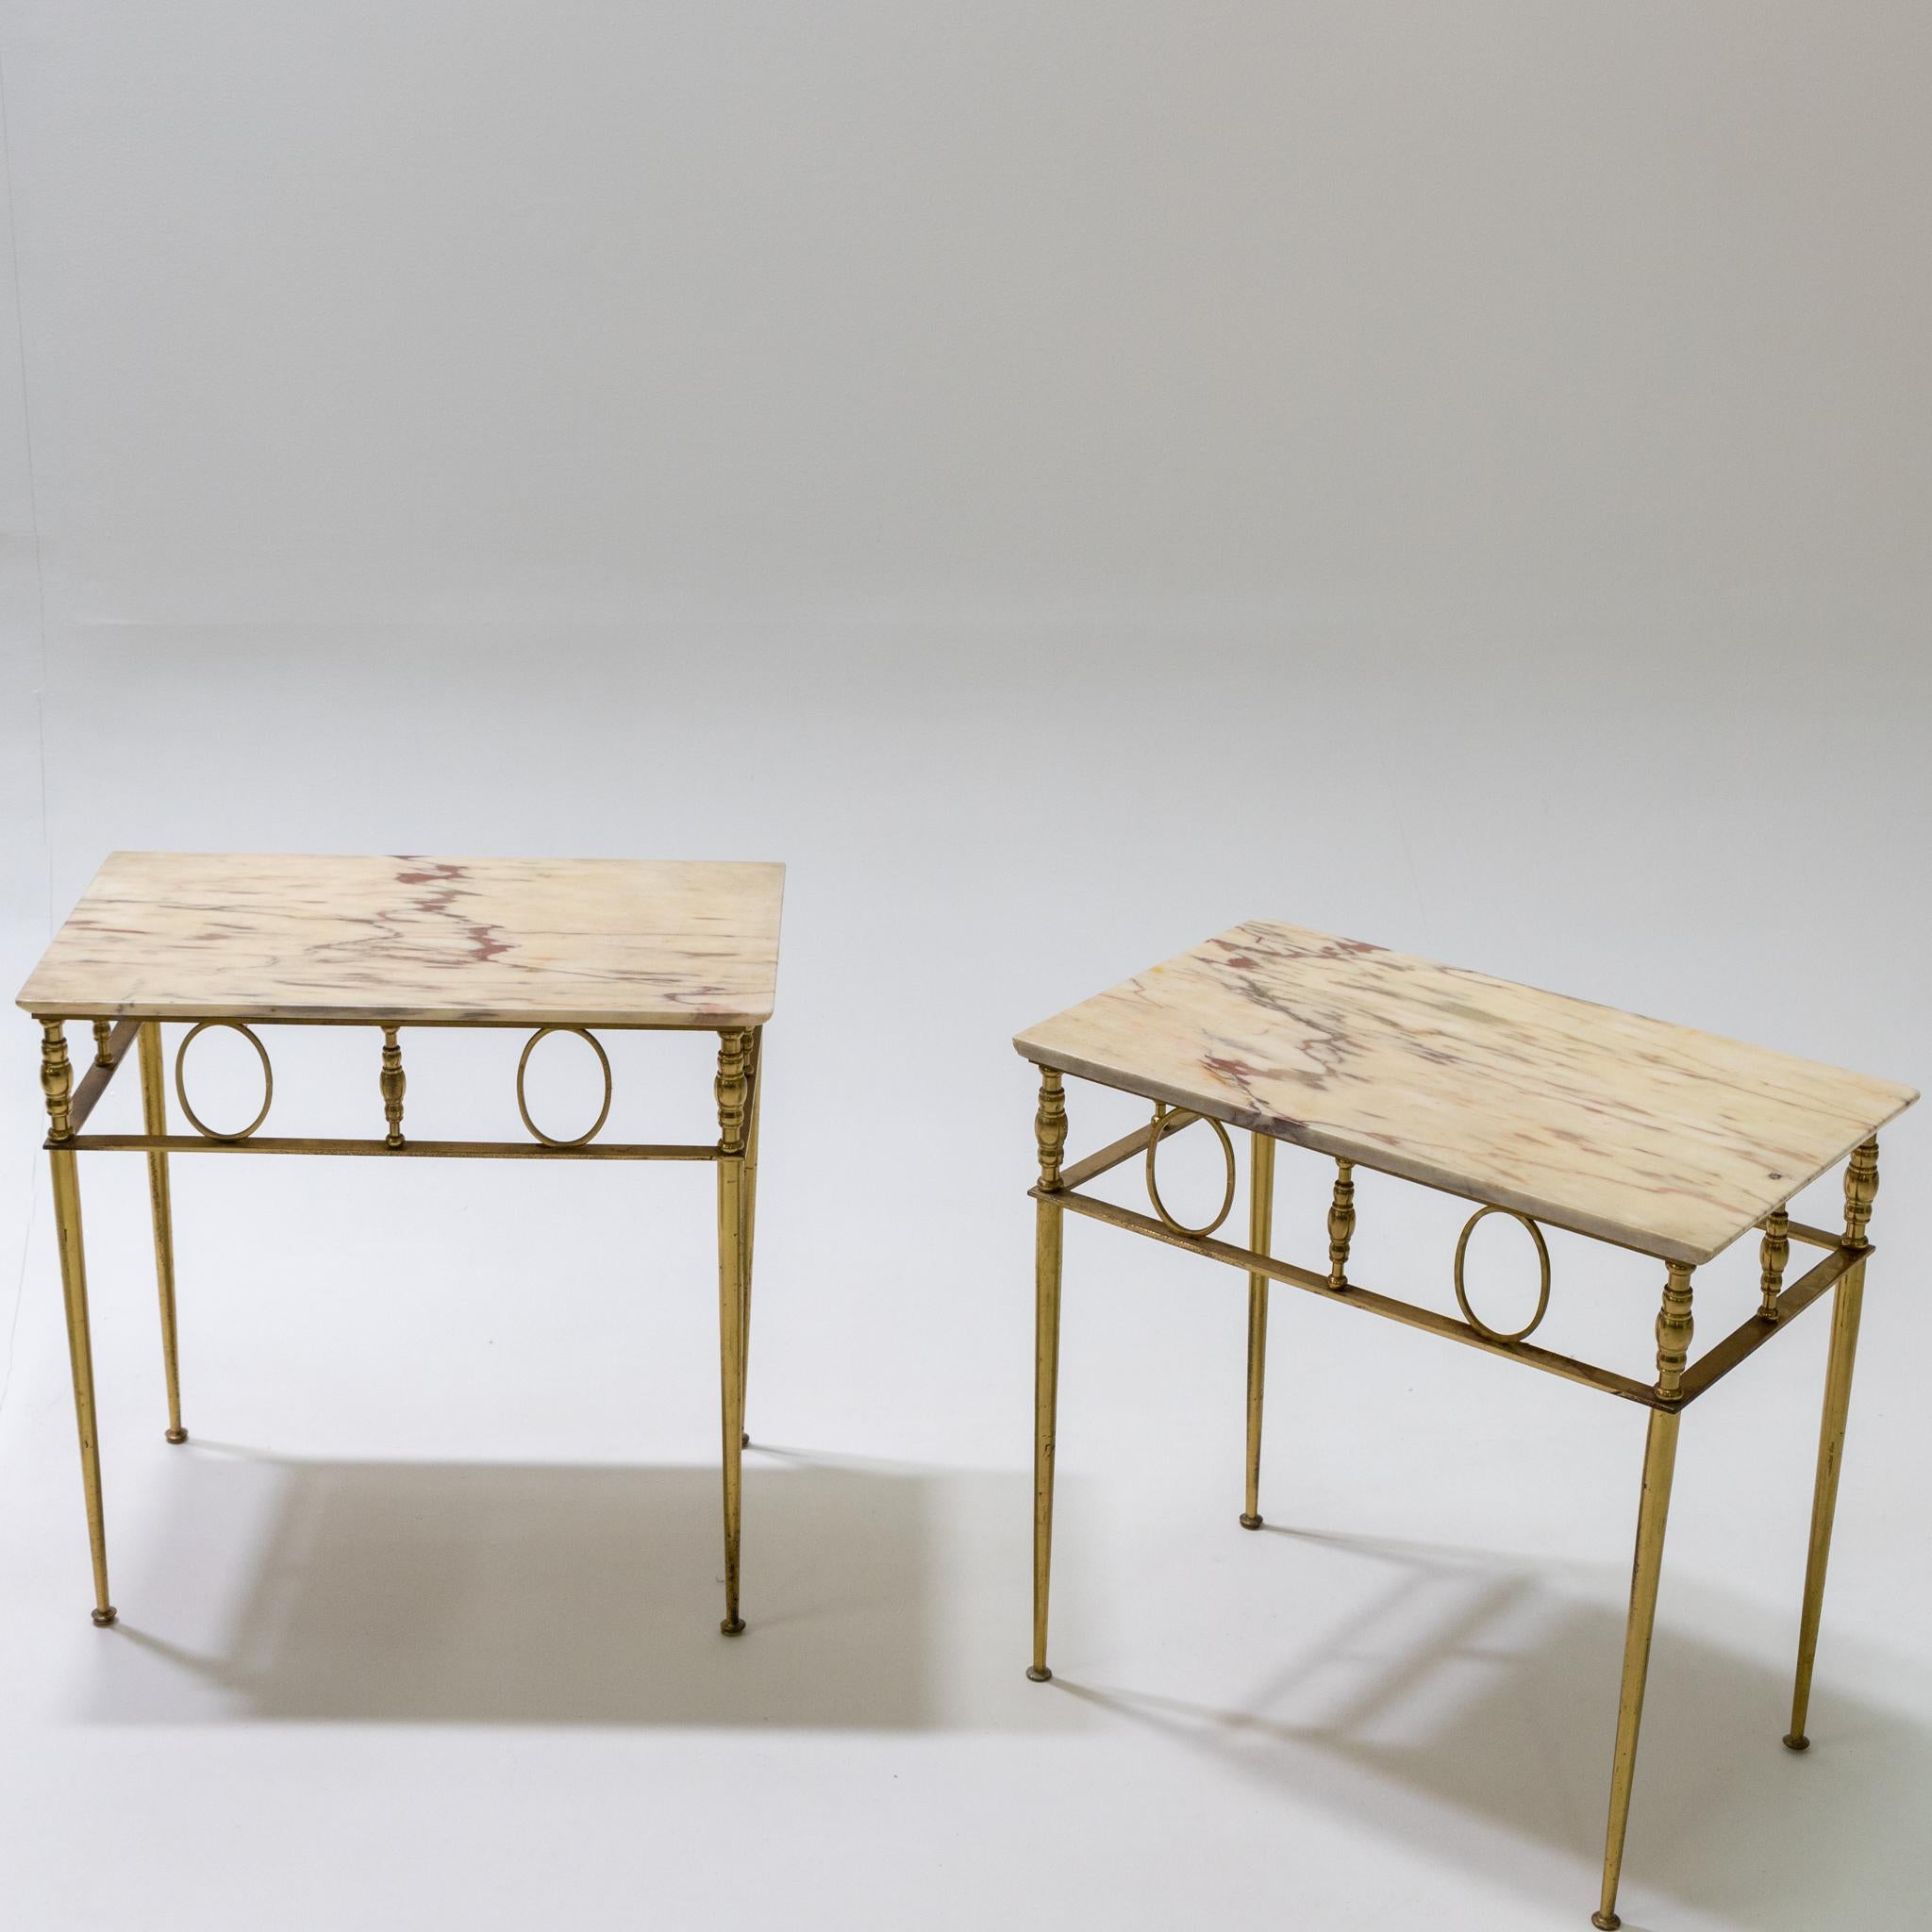 Pair of side tables with brass frames and beige stone tops.